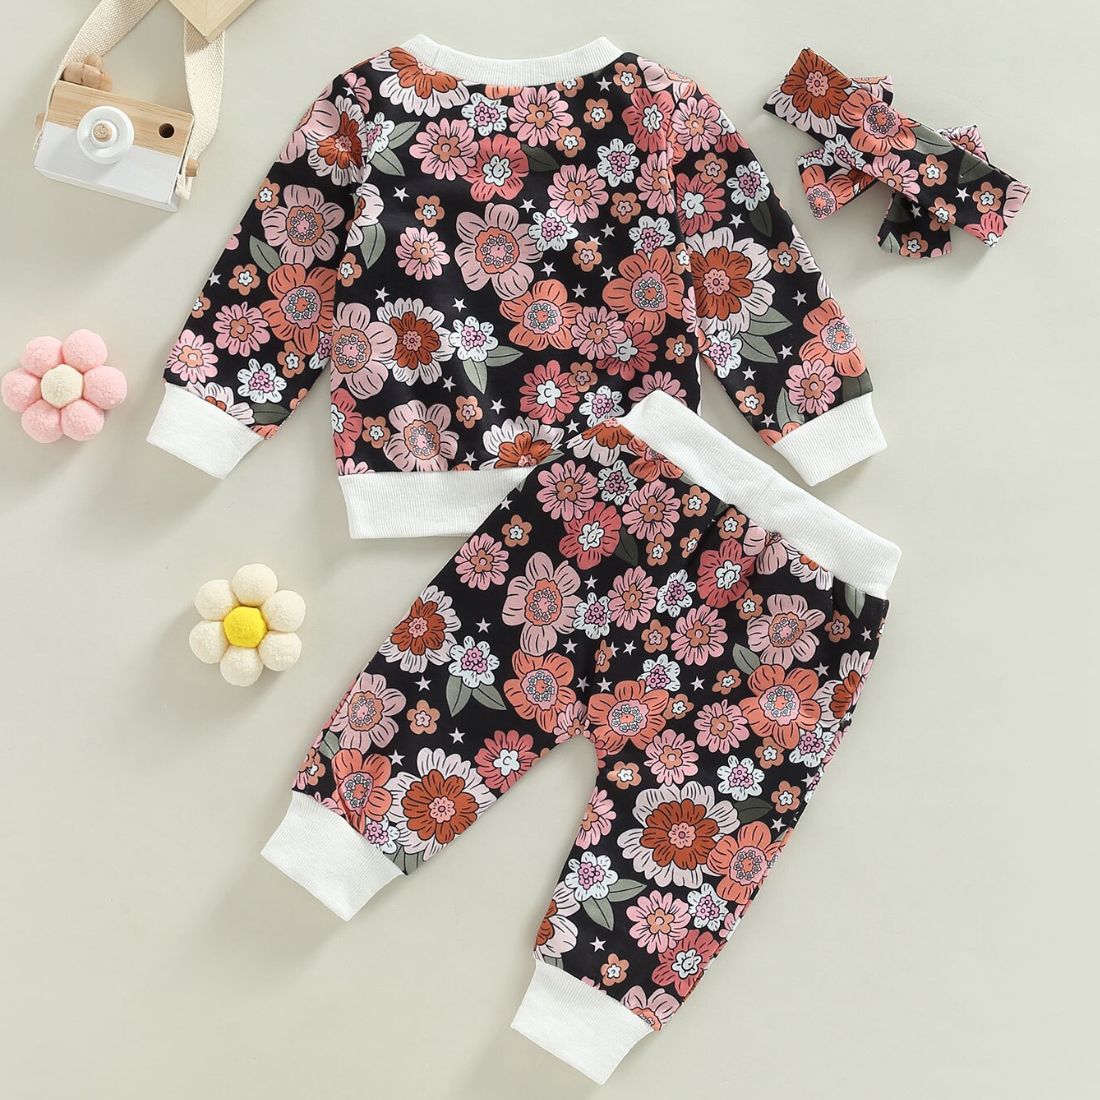 Reverse side of Night Floral Sweaty Baby Girl Set